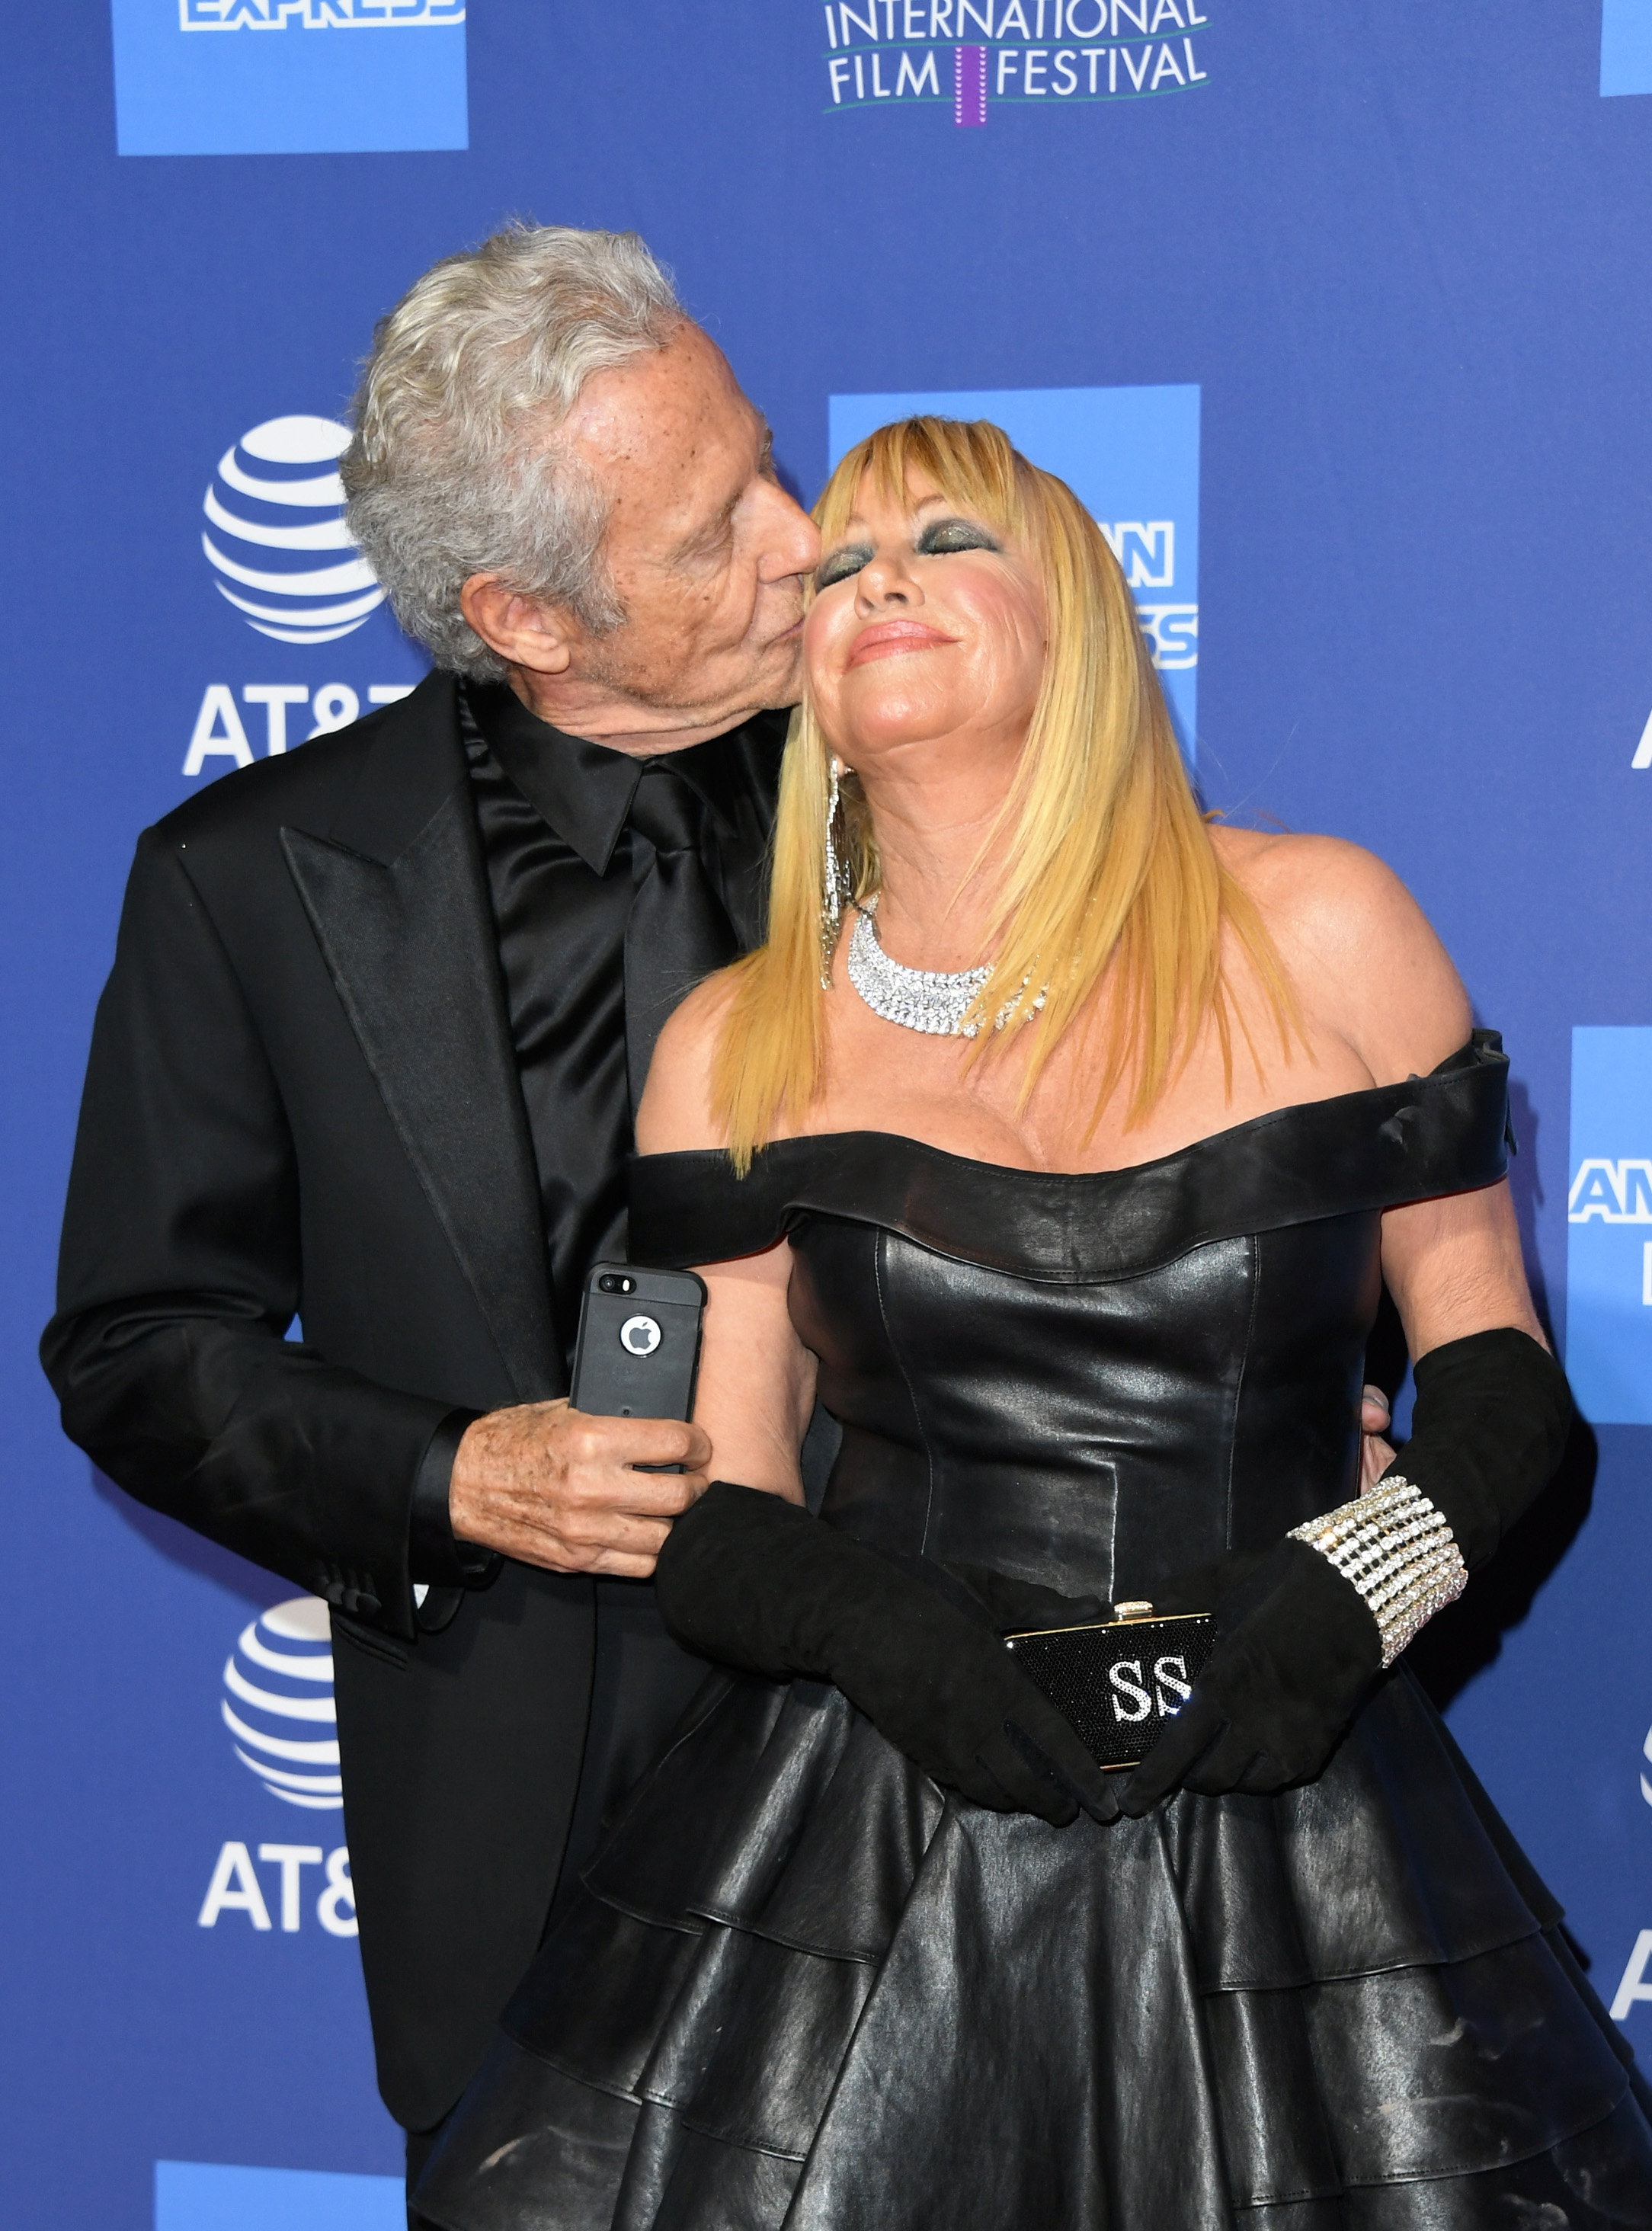 Alan Hamel et Suzanne Somers au Search the world's best editorial photos Editorial Images Images Creative Editorial Video Creative Editorial 30th Annual Palm Springs International Film Festival Film Awards Gala | Source : Getty Images